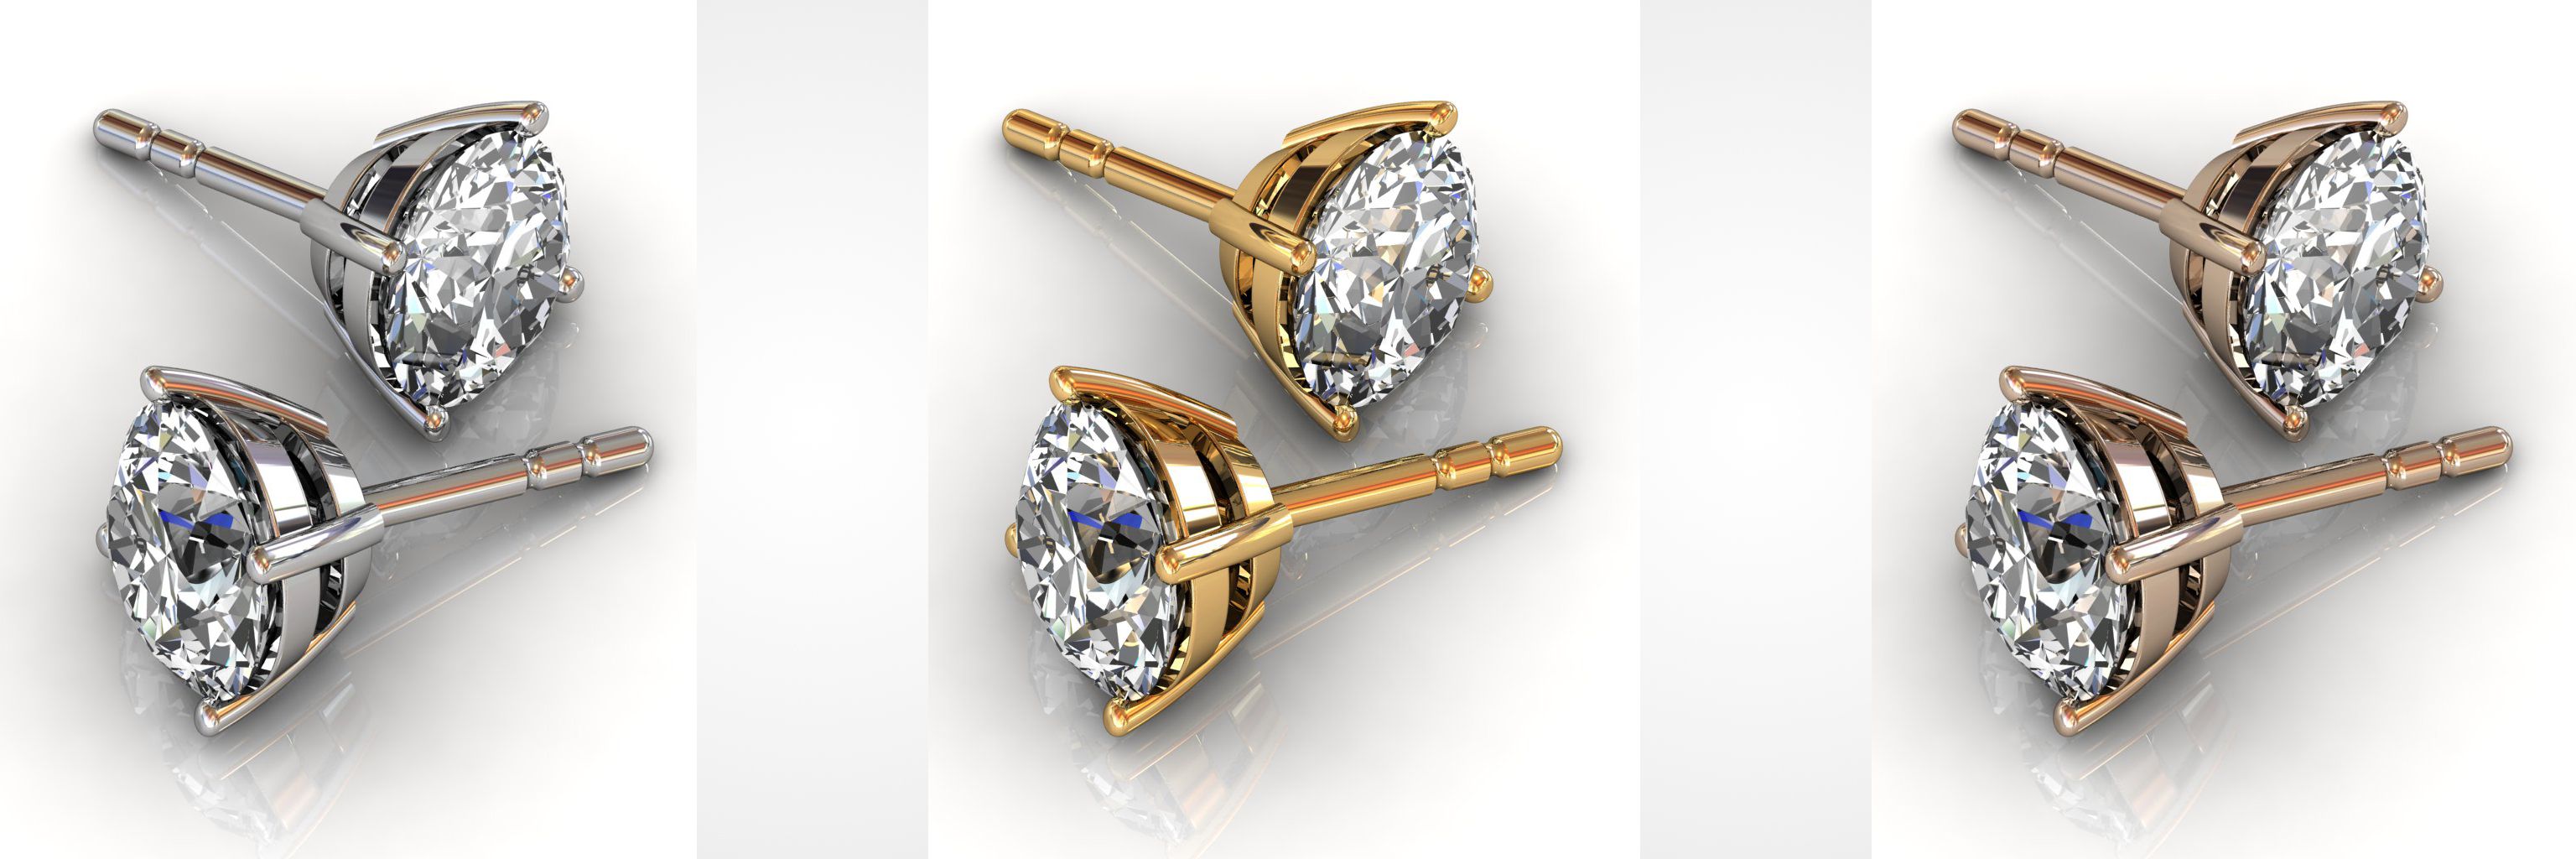 diamond stud earrings - in yellow, rose, or white gold